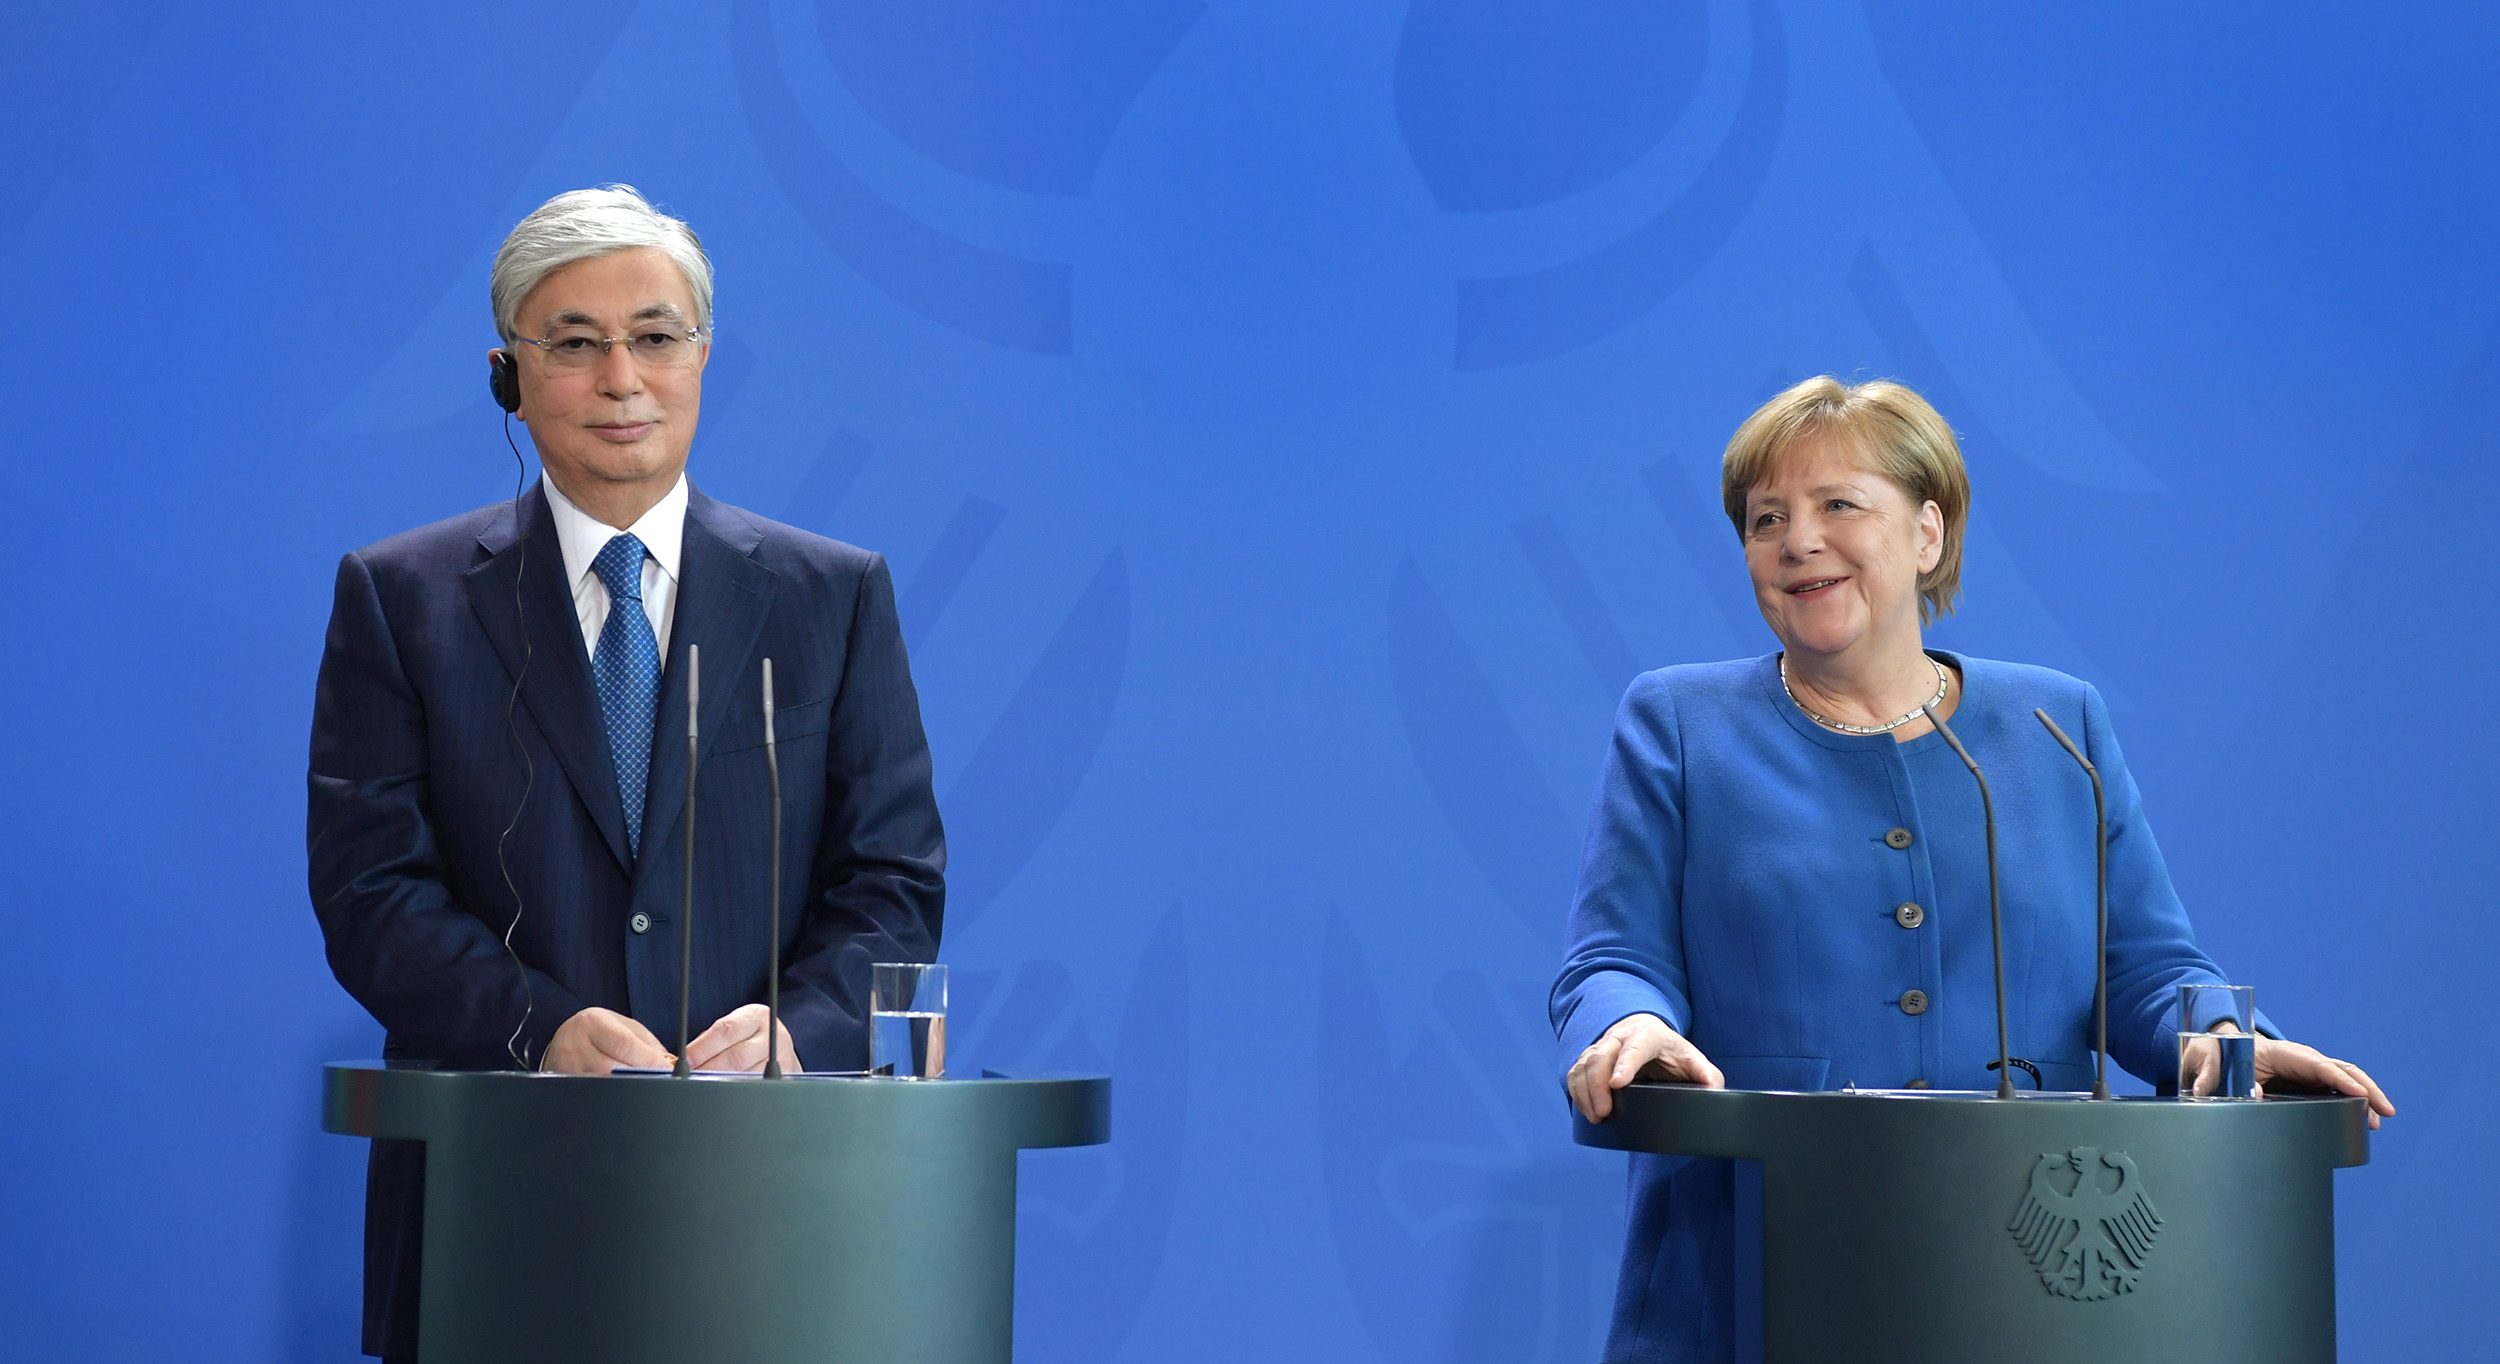 Kazakh President and the Chancellor of Germany holds press conference